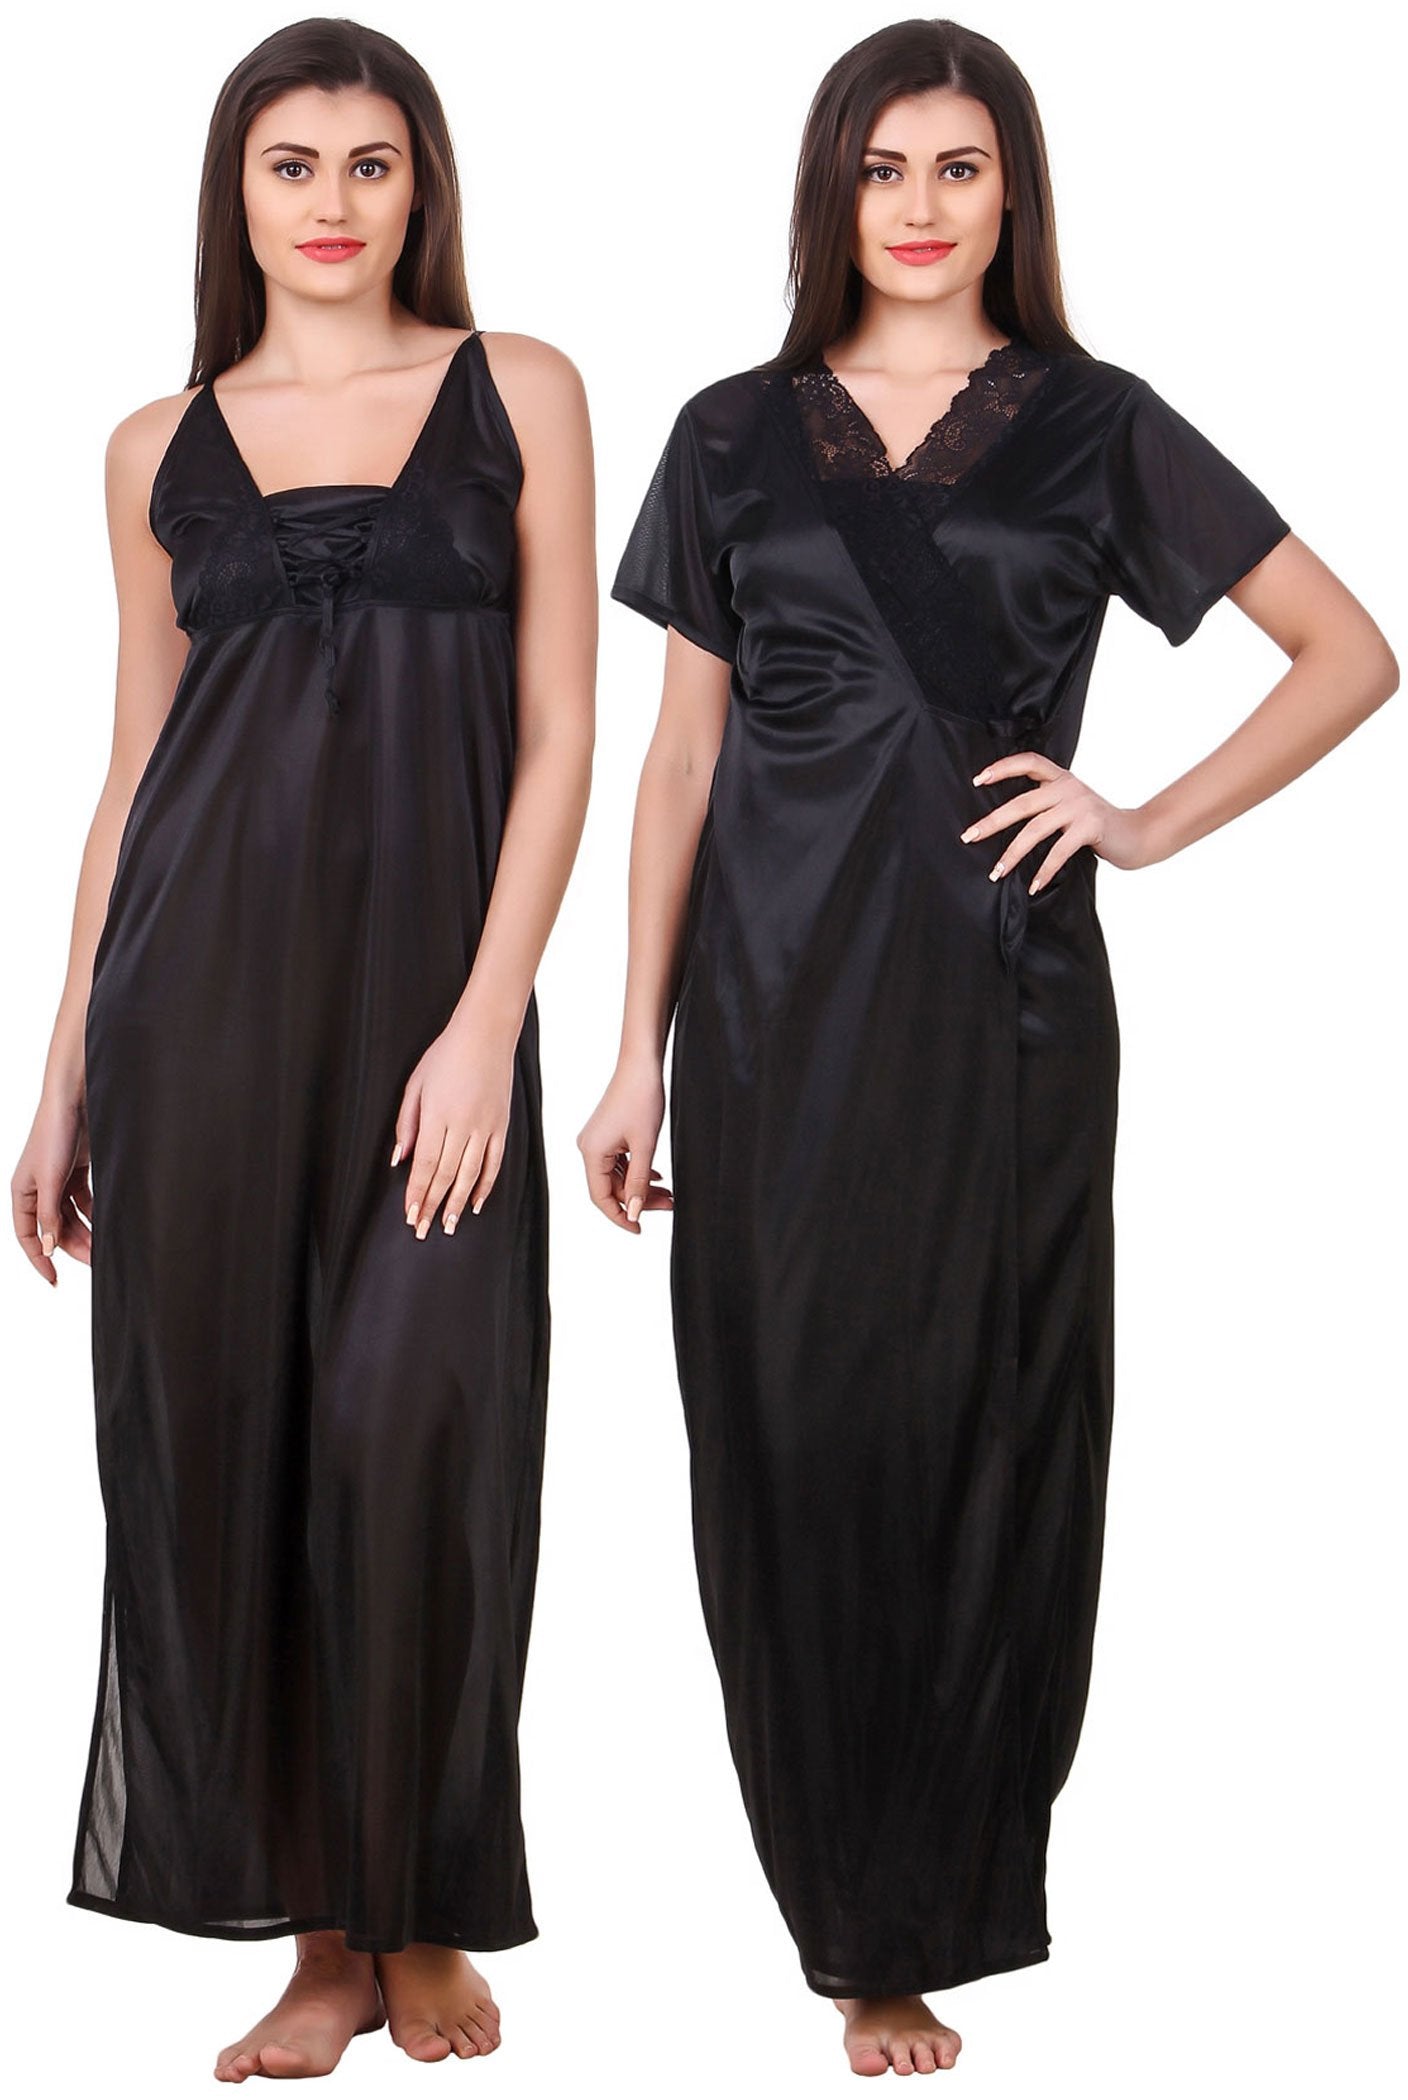 Black / One Size Madison Plus size Nightgown and Robe Set Clearance The Orange Tags